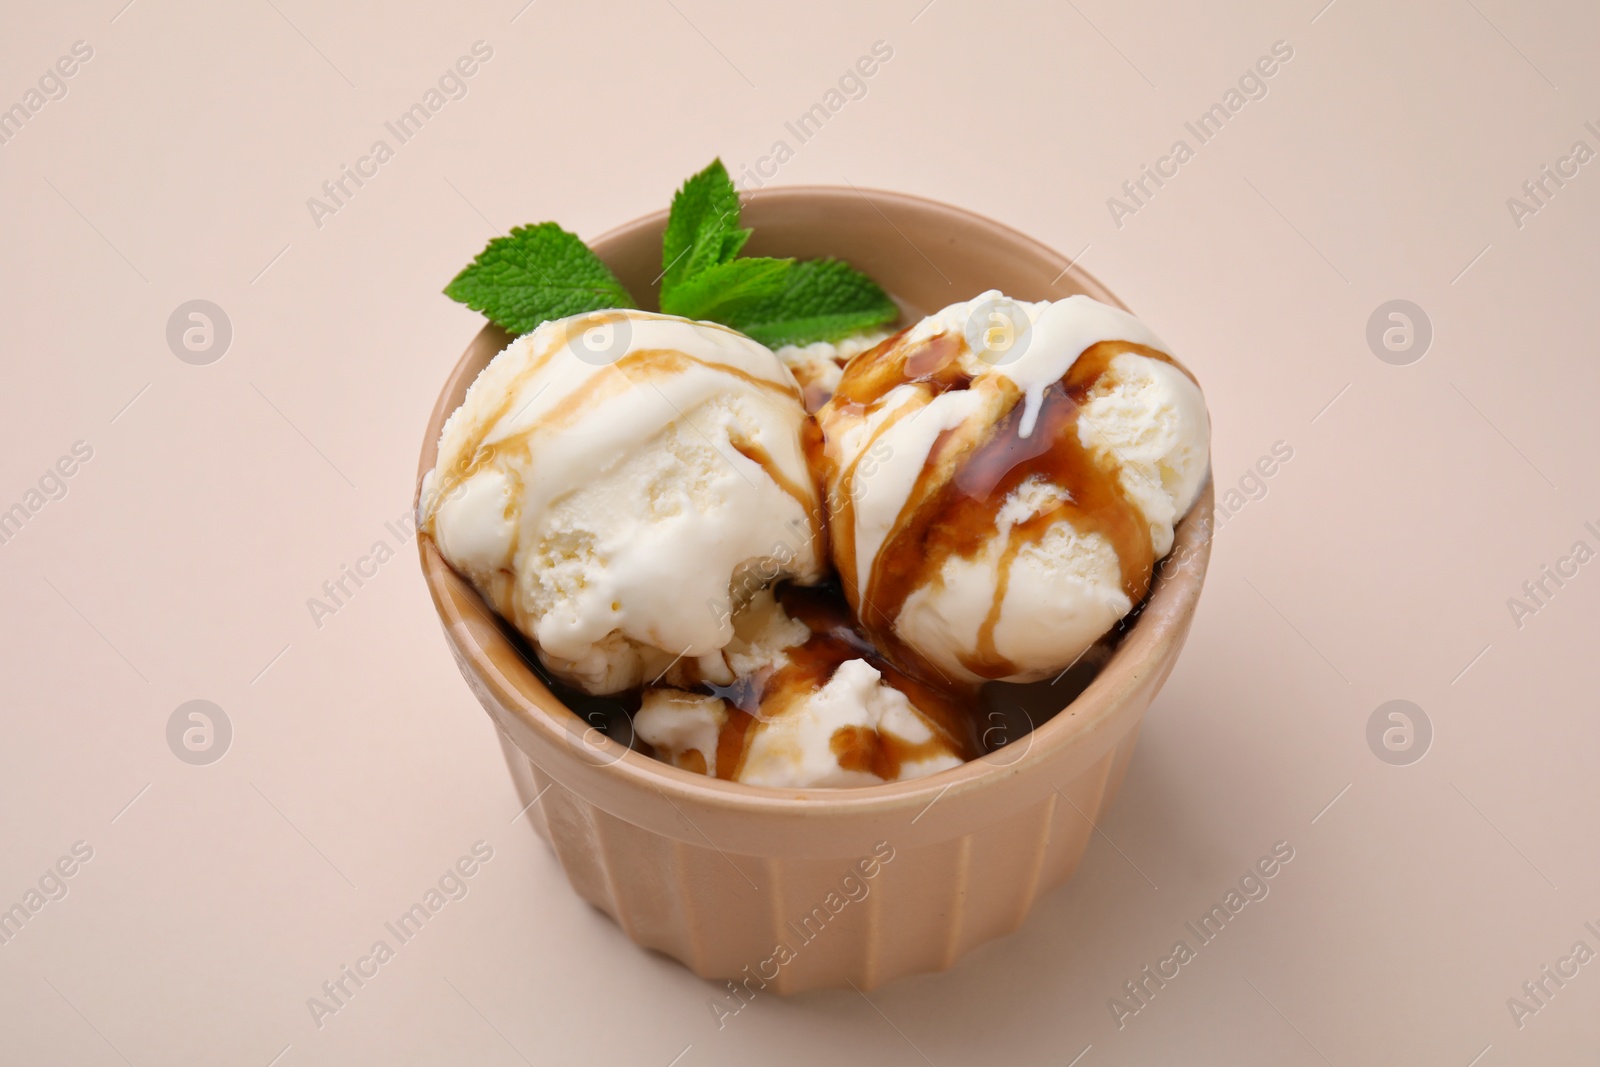 Photo of Scoops of ice cream with caramel sauce and mint leaves on beige table, closeup